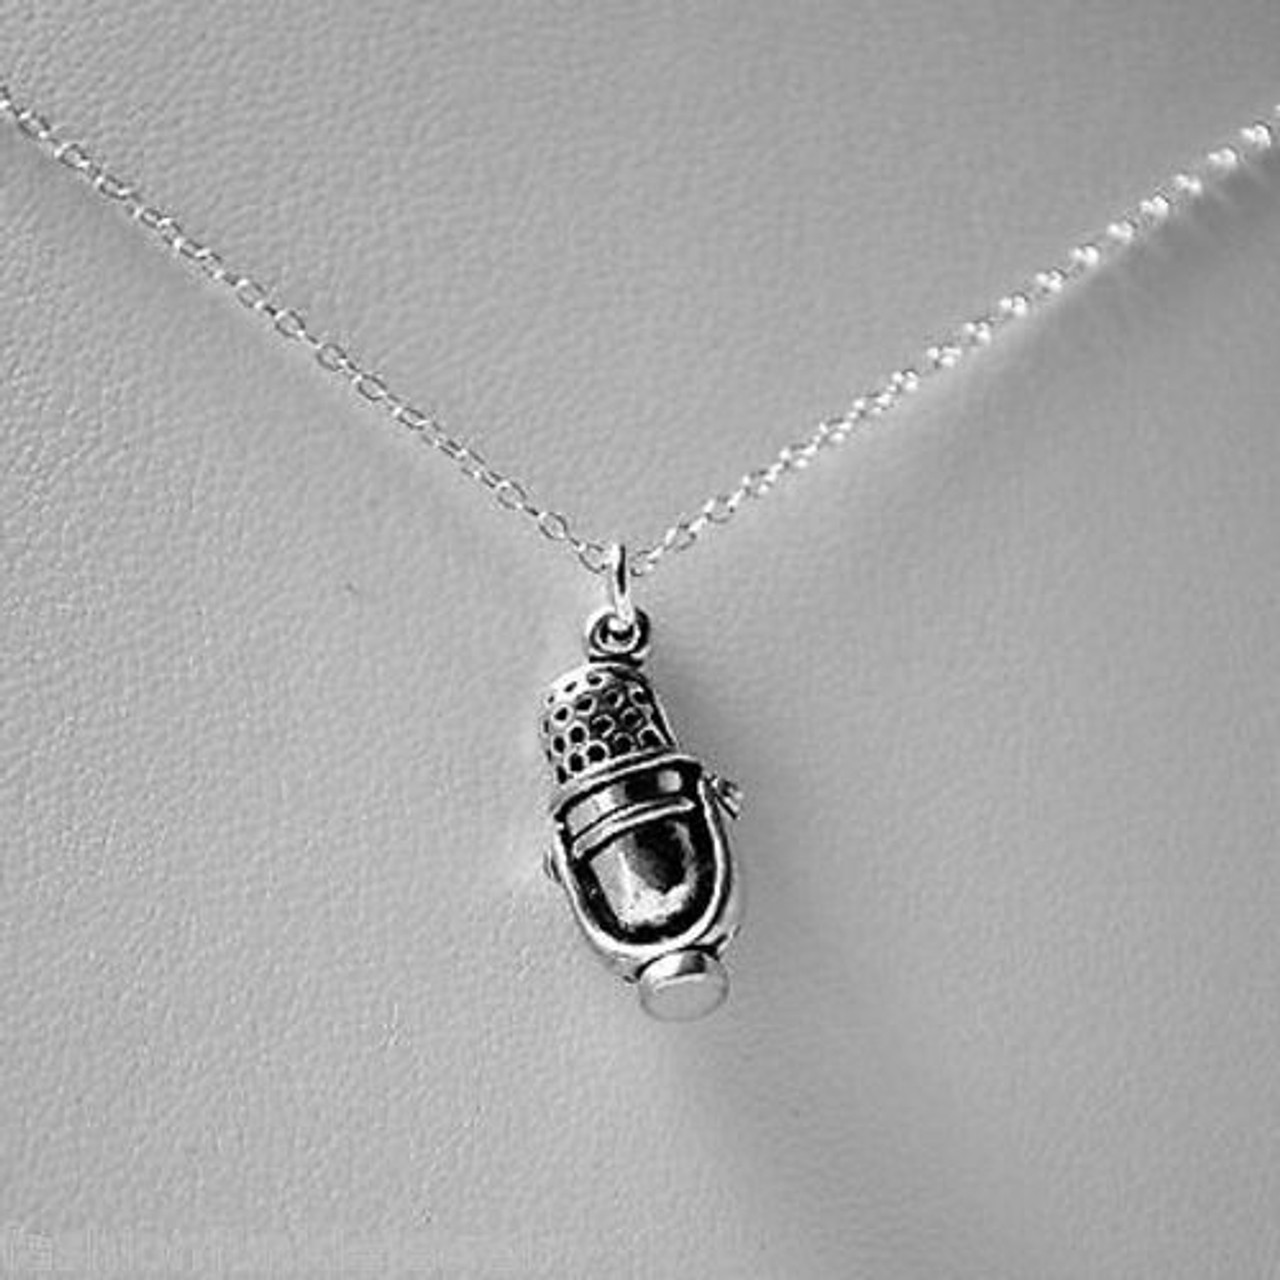 Microphone Necklace - 925 Sterling Silver - FashionJunkie4Life